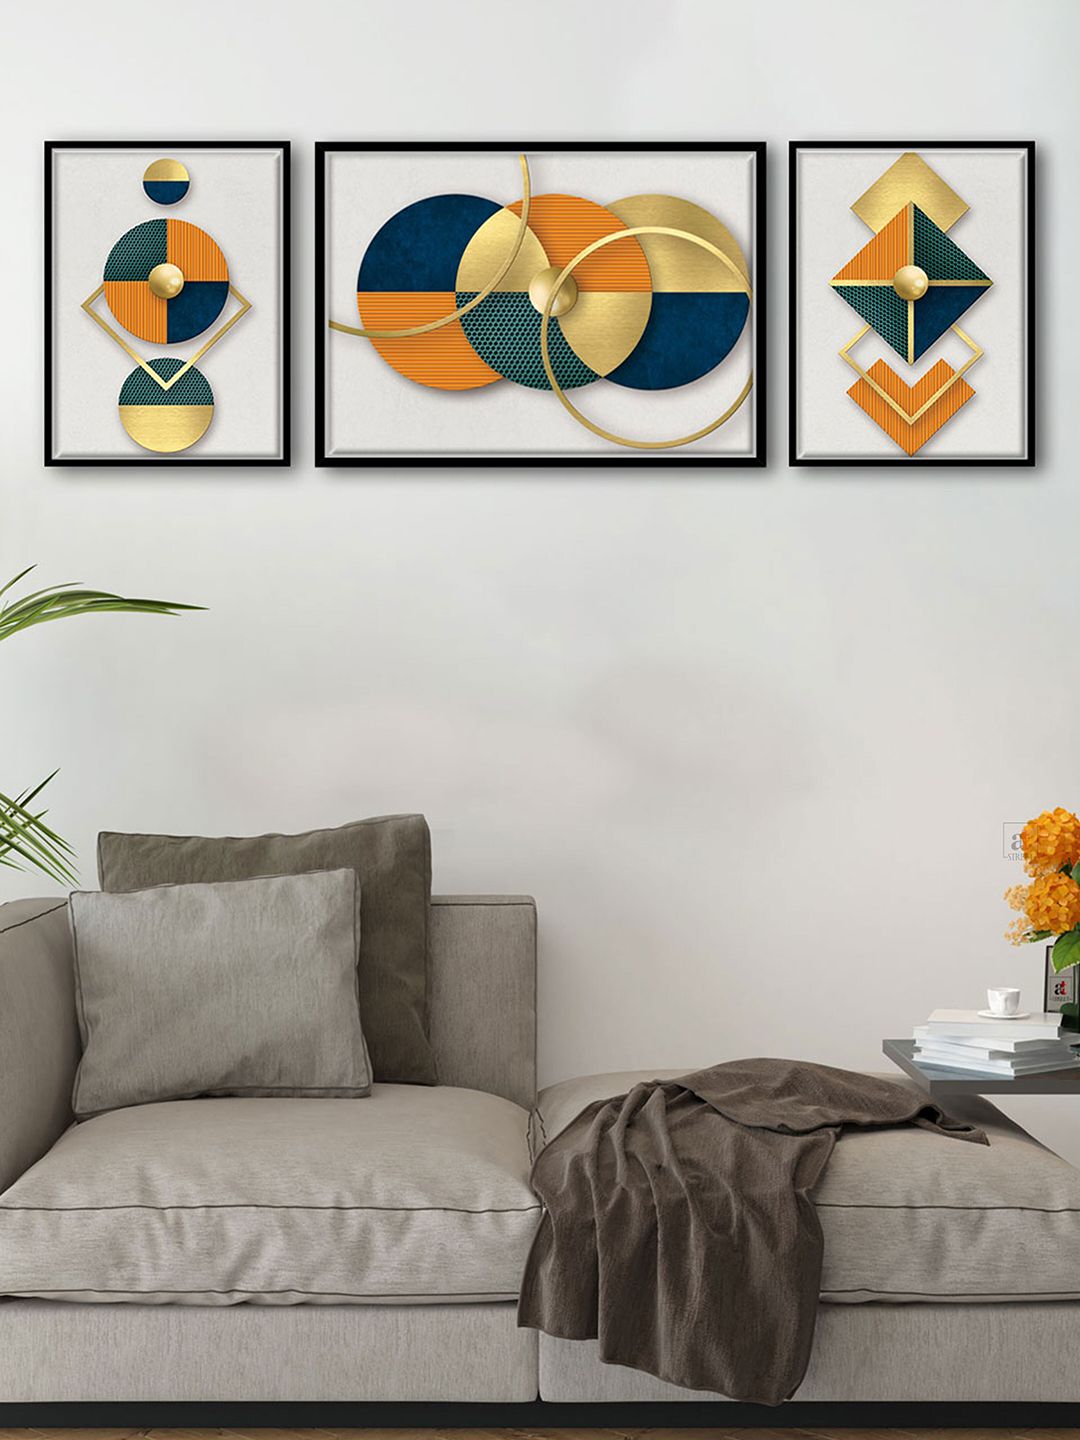 Art Street Set of 3 Minimalistic Geometric Canvas Wall Painting Price in India